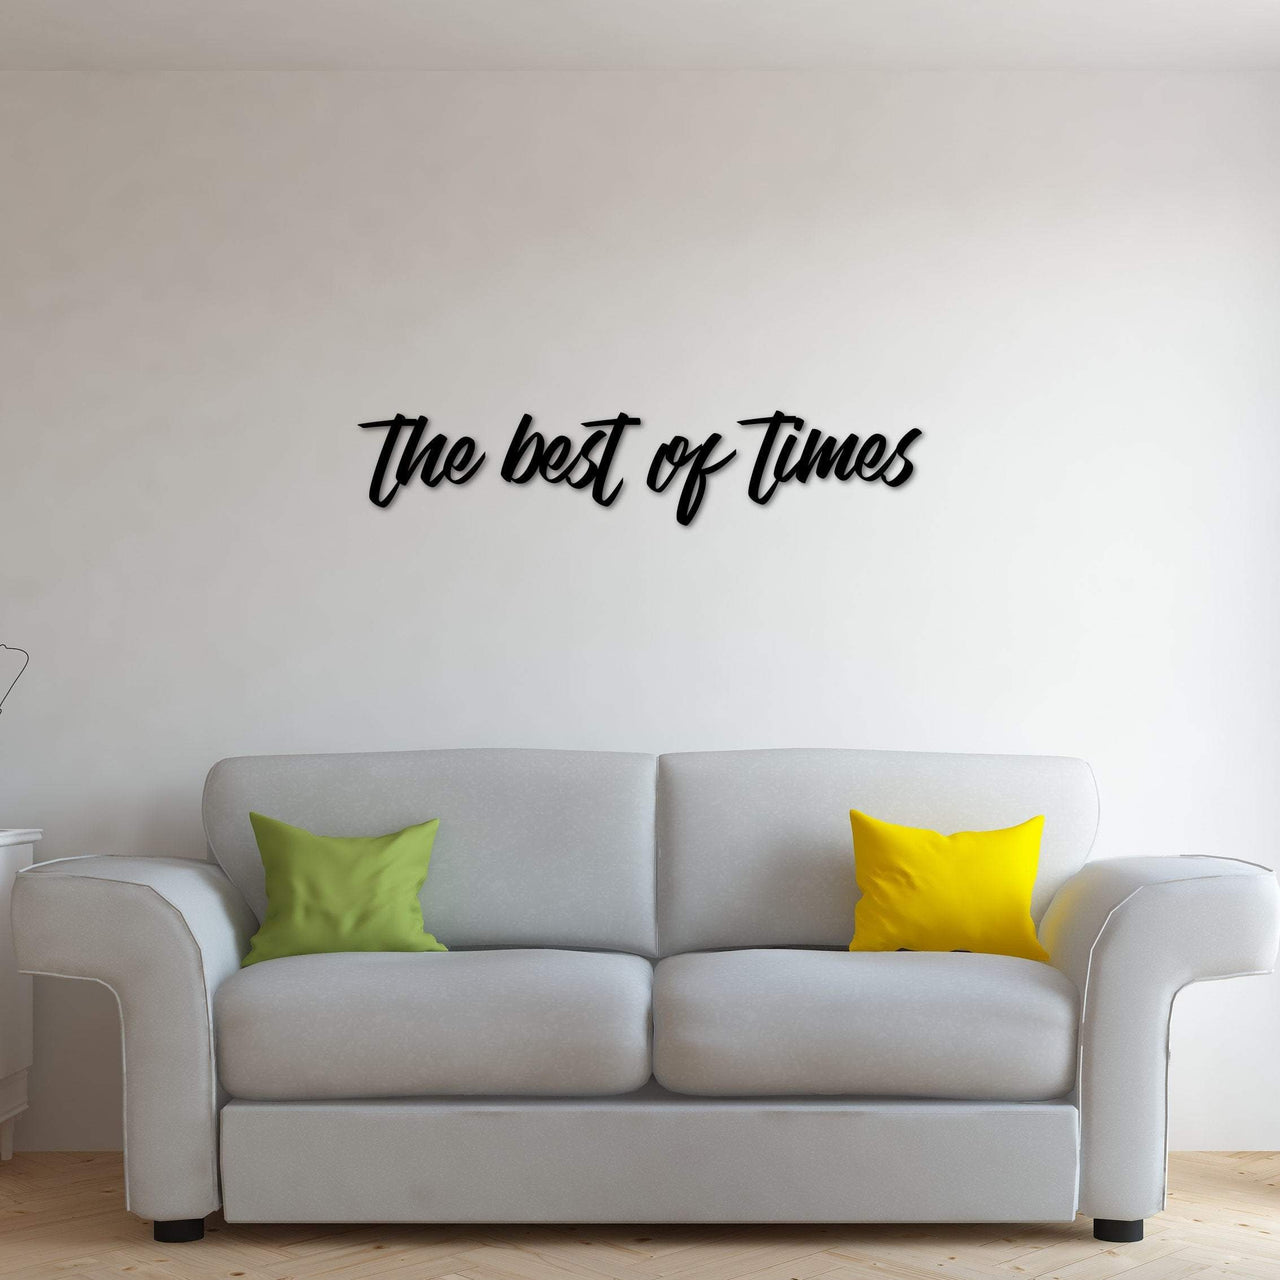 The Best of Times Sign | Metal Wall Quote | Metal Cutout | Gallery Wall Decor | Living Room Decor | Memories Wall Phrase to put by Clock